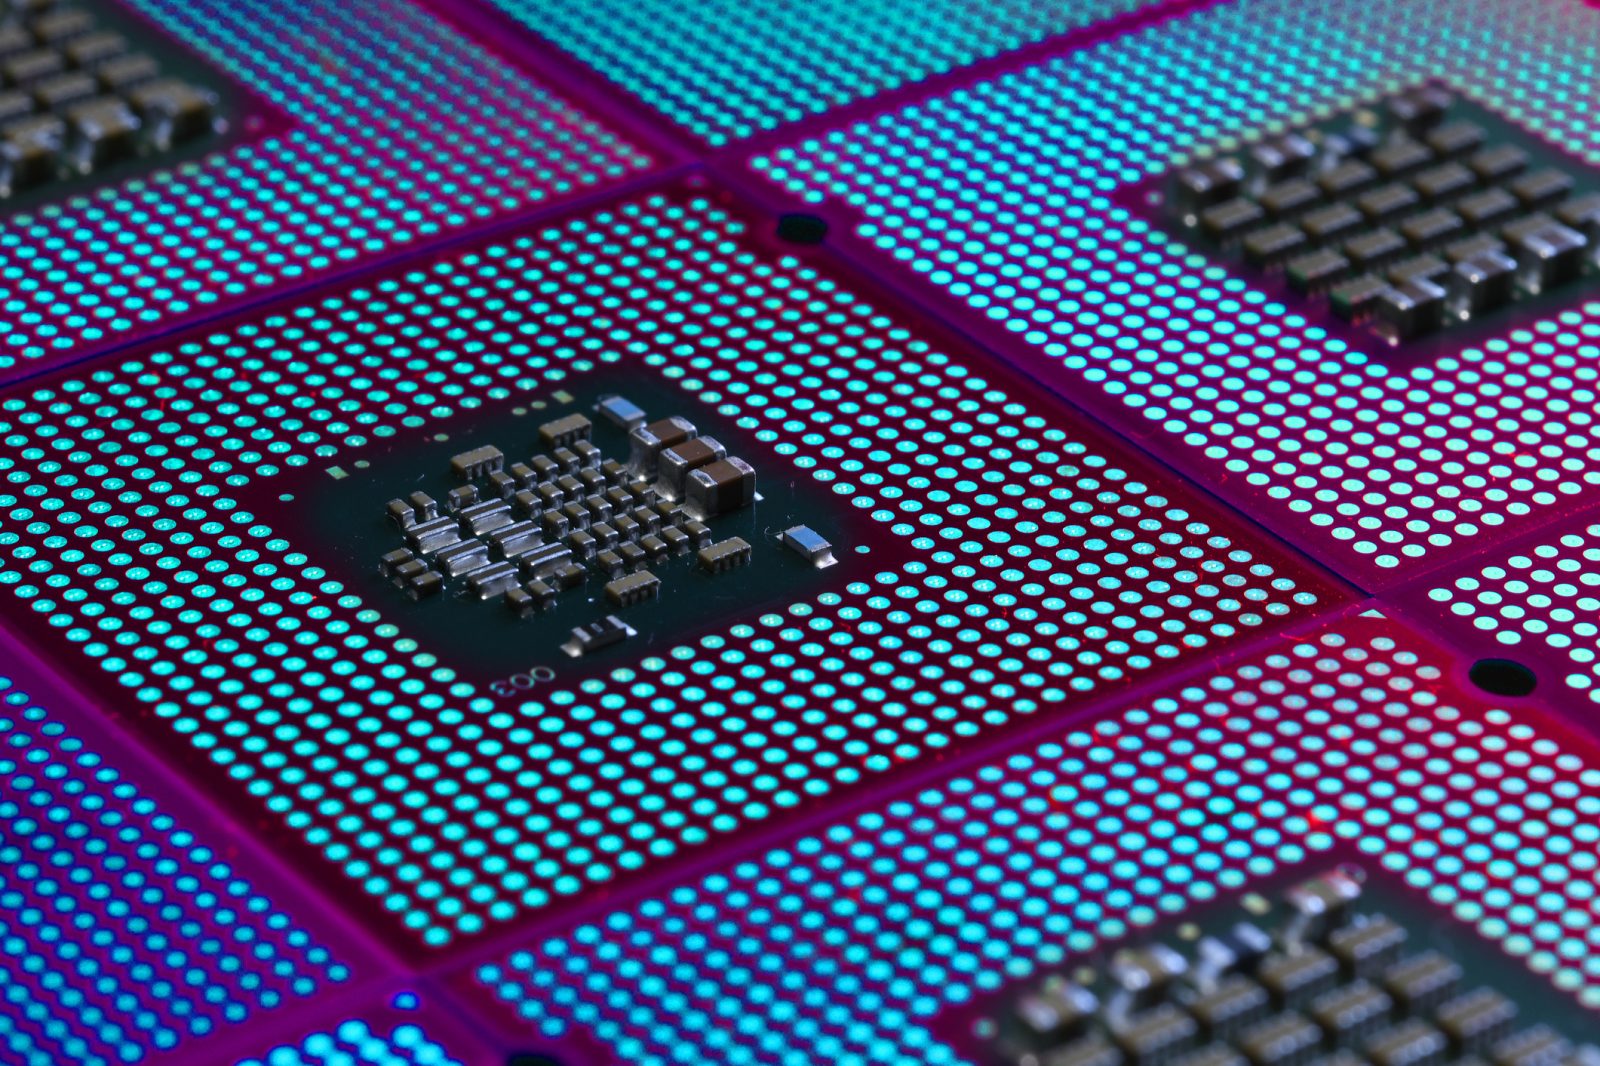 Background image: Microchips